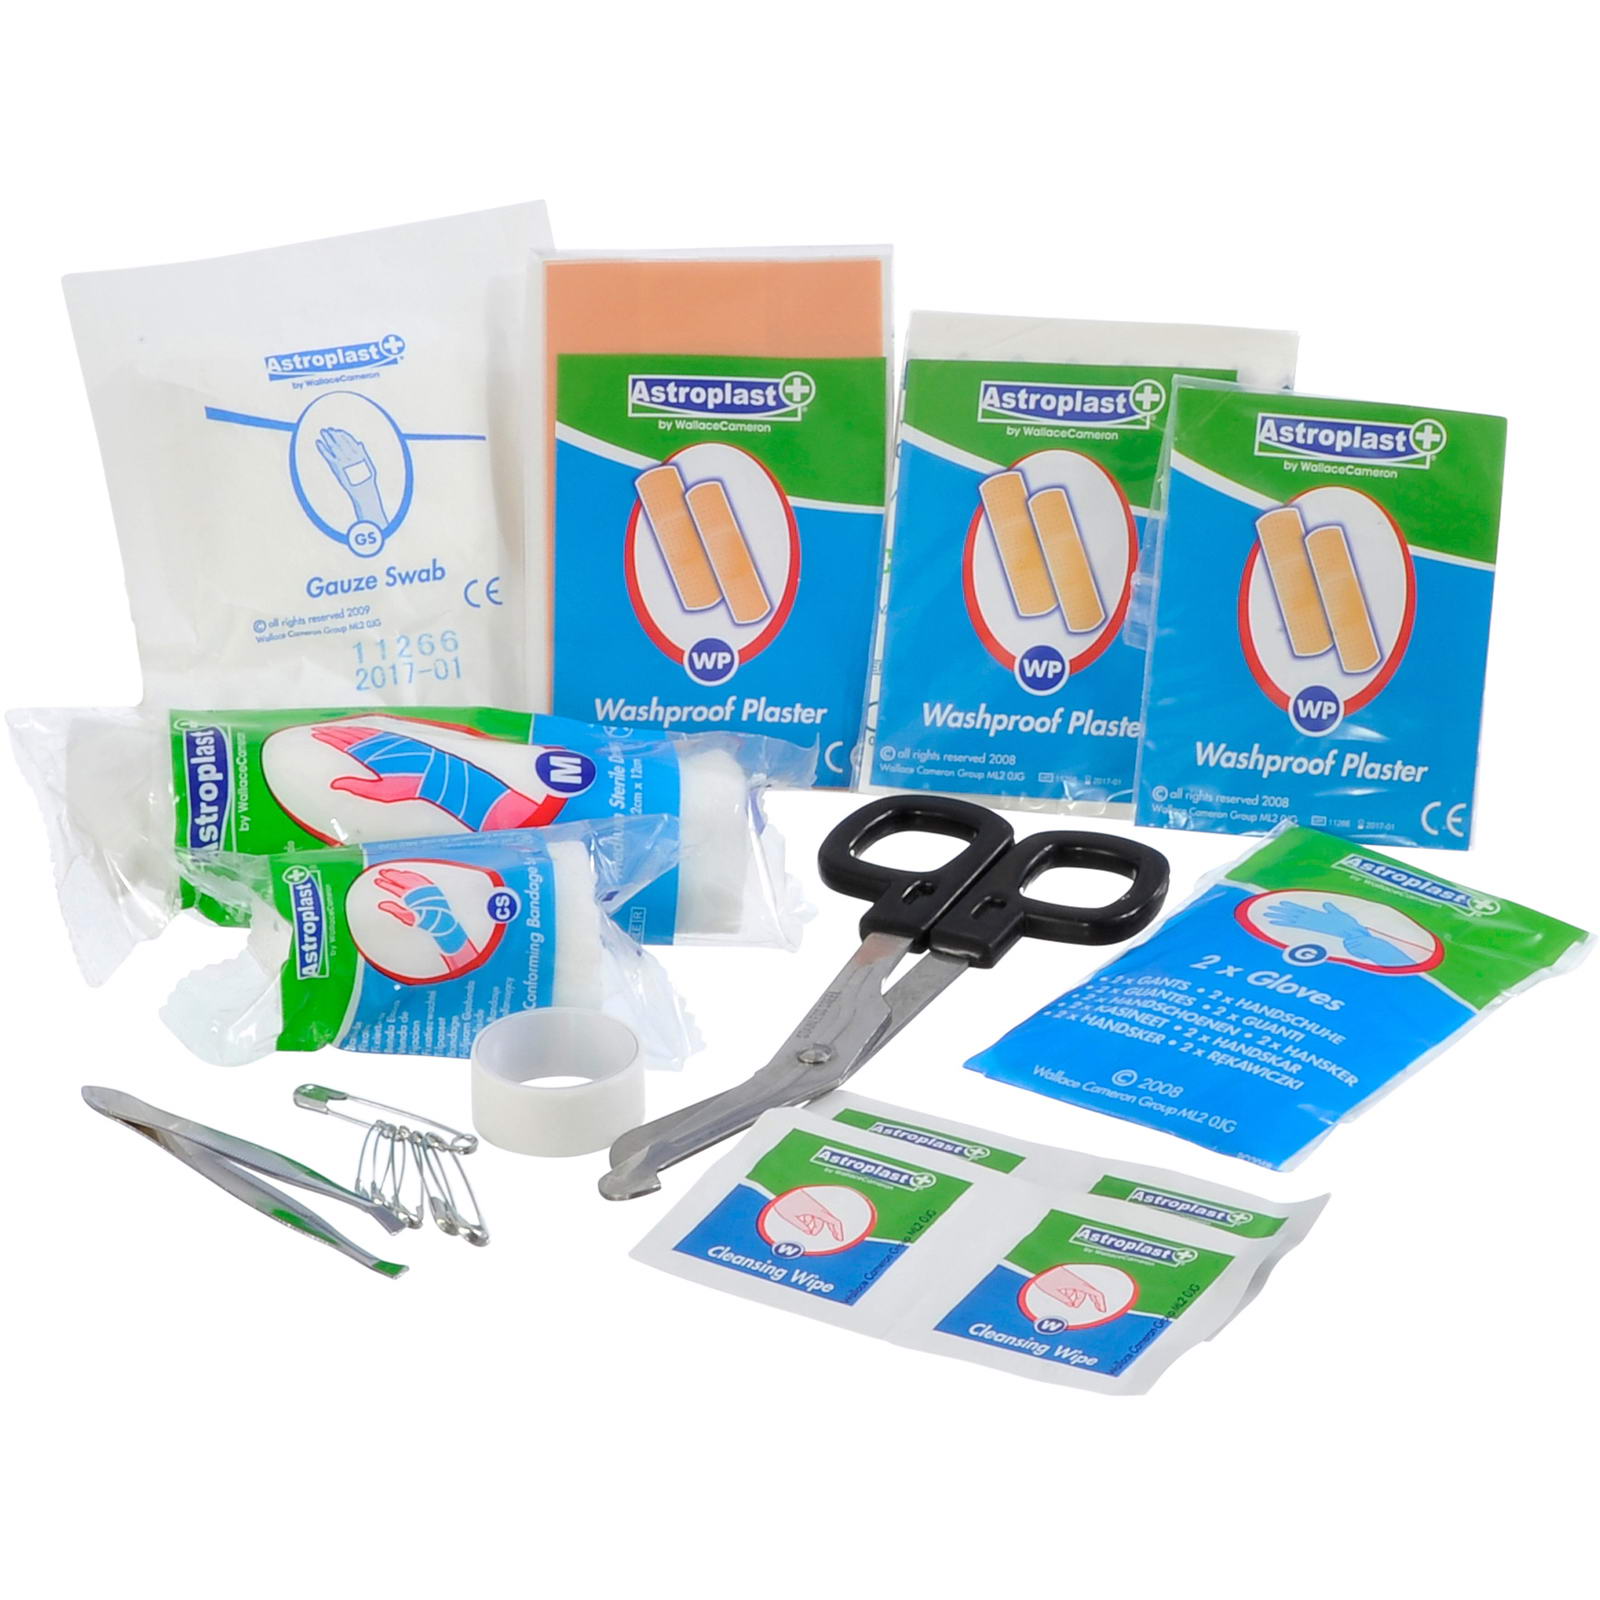 Care Plus First Aid Kit Roll Out Medium - Erste-Hilfe Set online